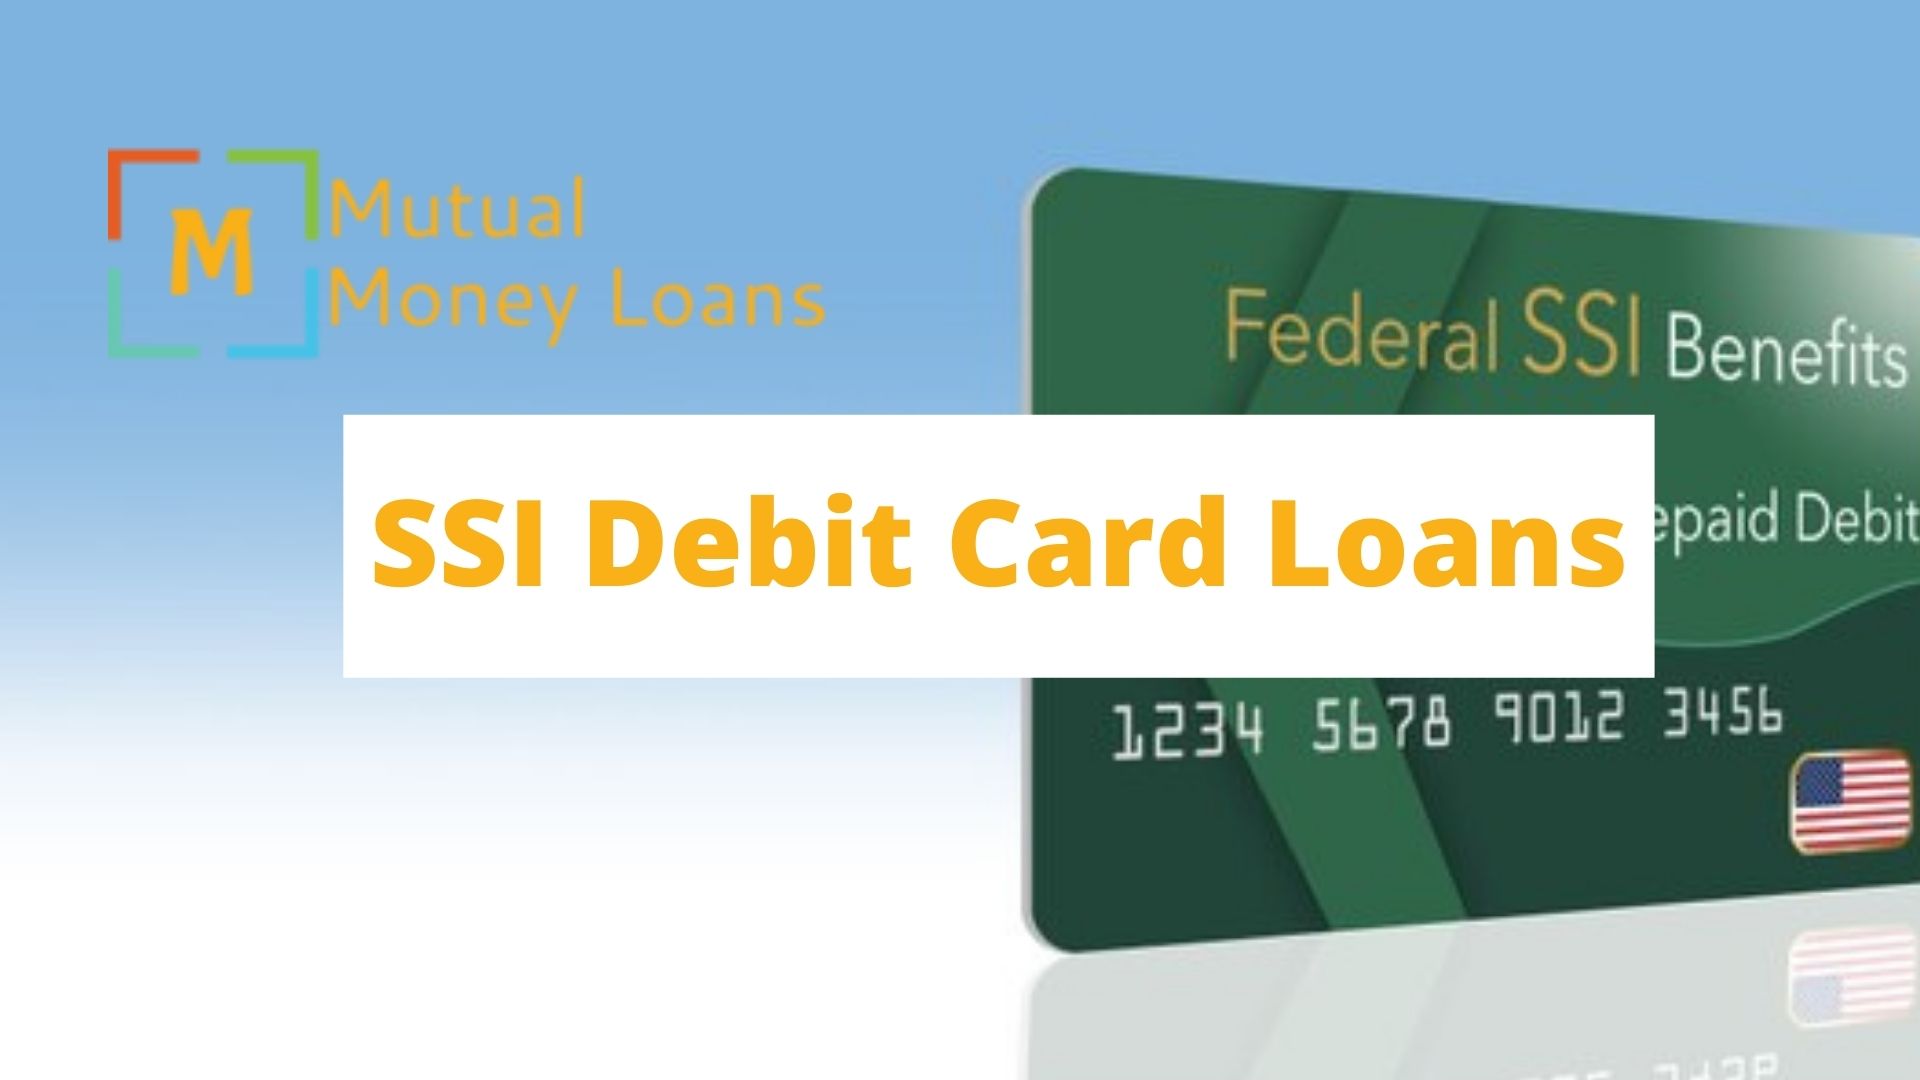 Payday Loans with SSI Debit Card